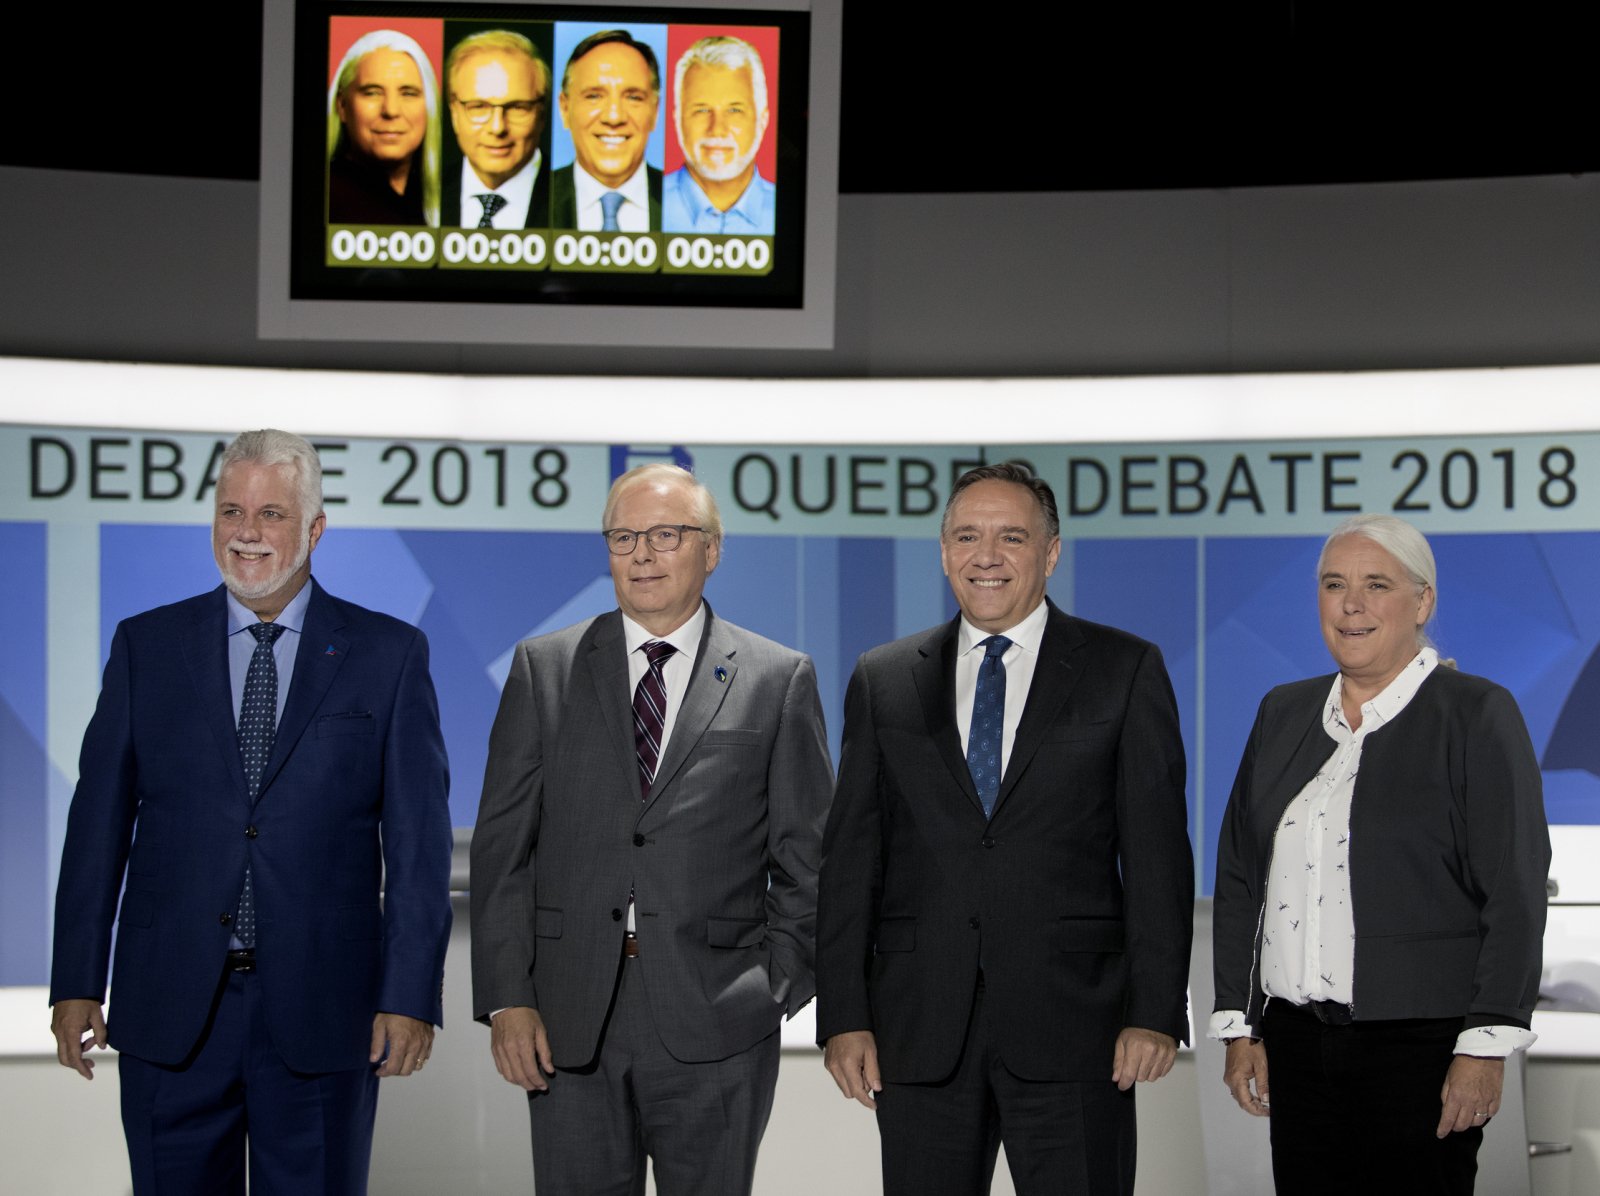 Quebec's four would-be leaders at the English-language debate on 17 September 2018